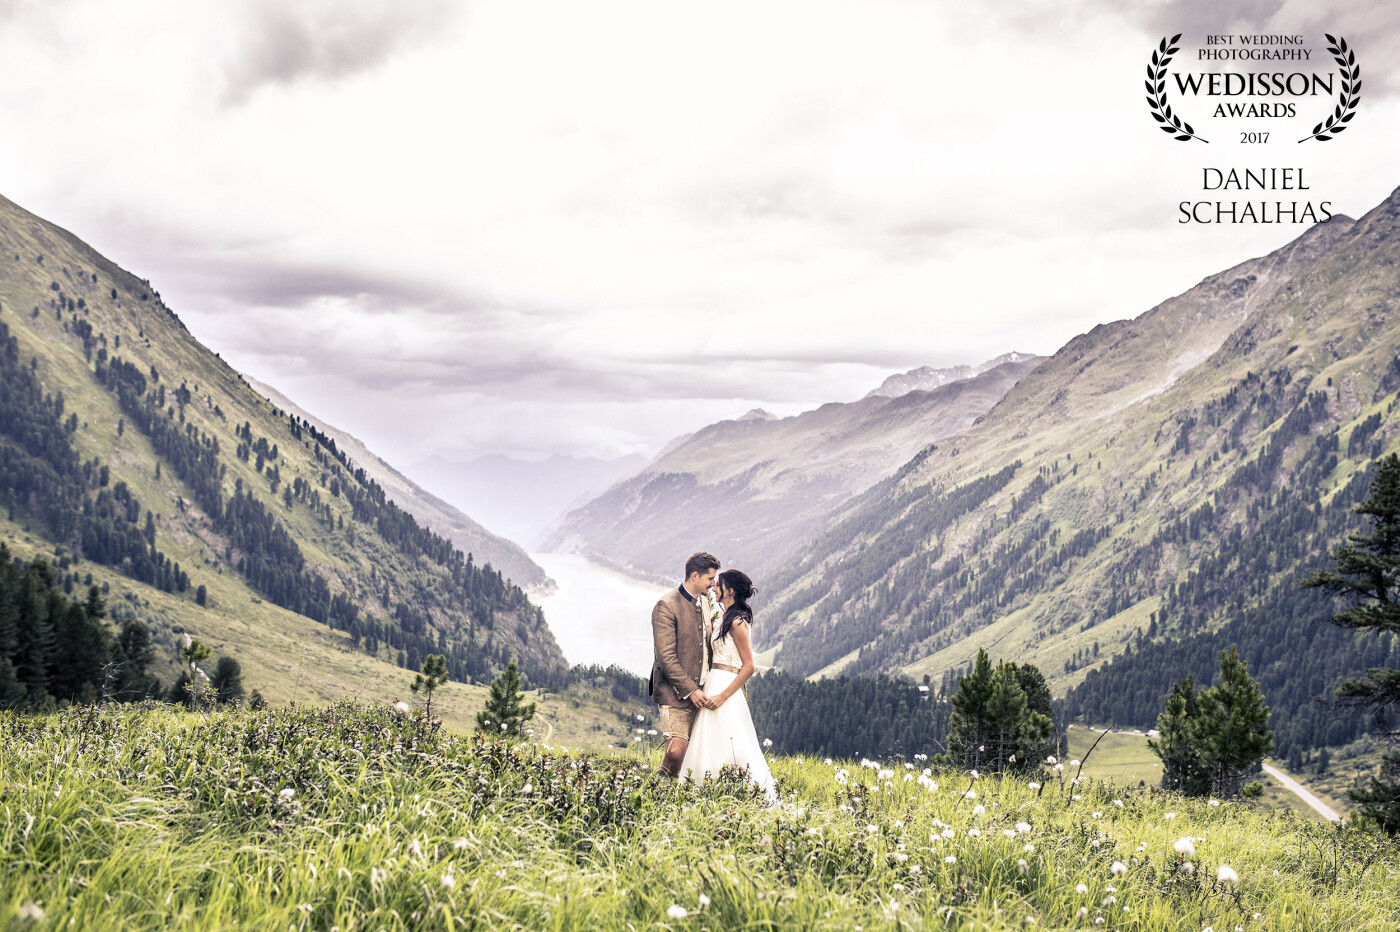 Who needs sunshine when you can have this mindblowing mountain scenery on a cloudy wedding in the Austrian alps? We had just about 20 minutes of shooting before it began to rain heavily - if you look closely you can see some raindrops.